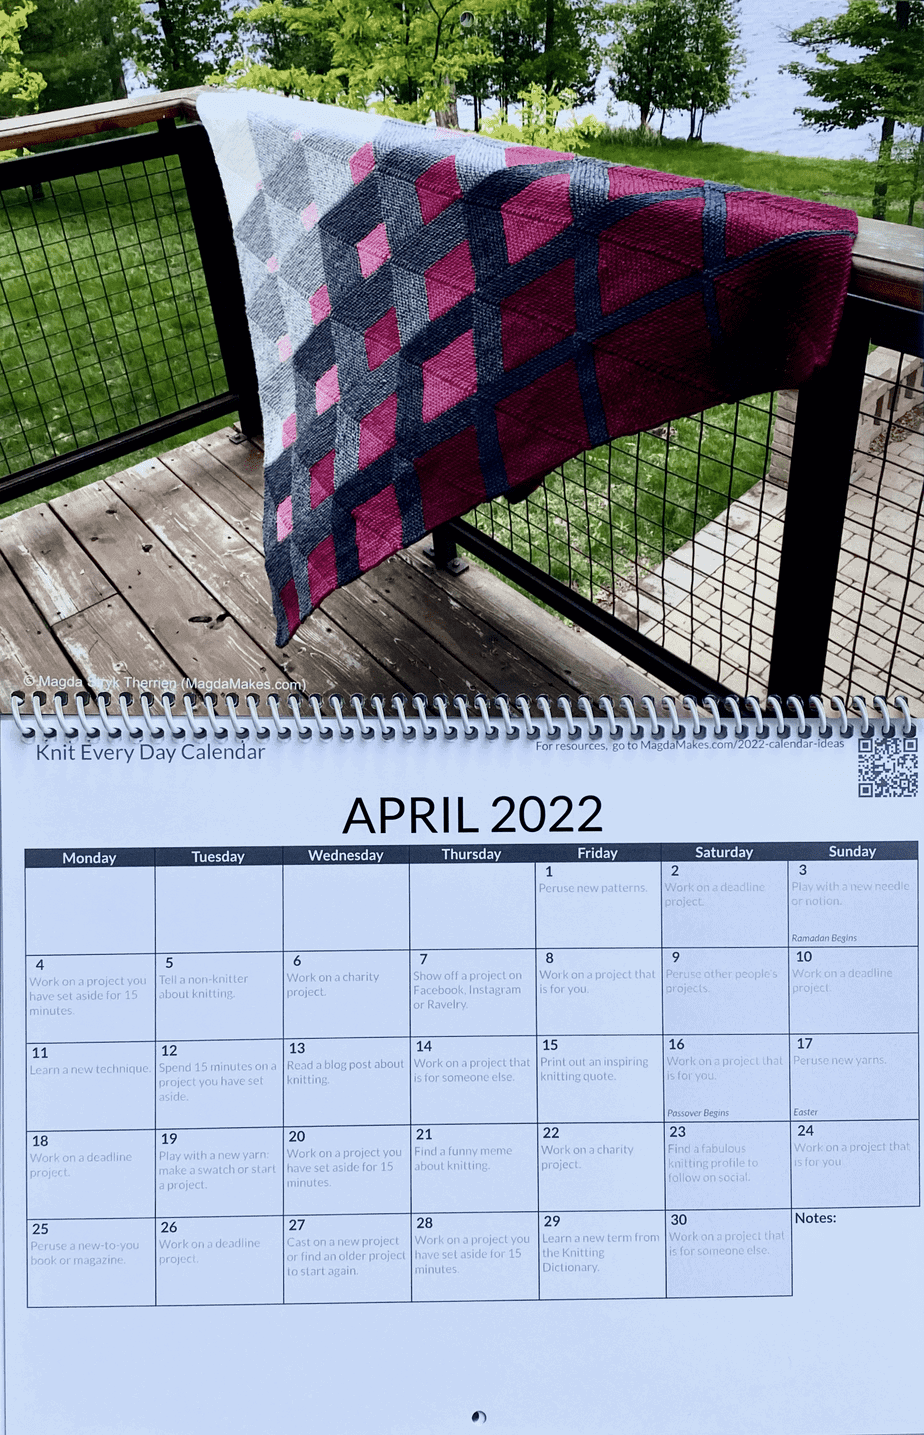 2022 Knit Every Day Calendar open to